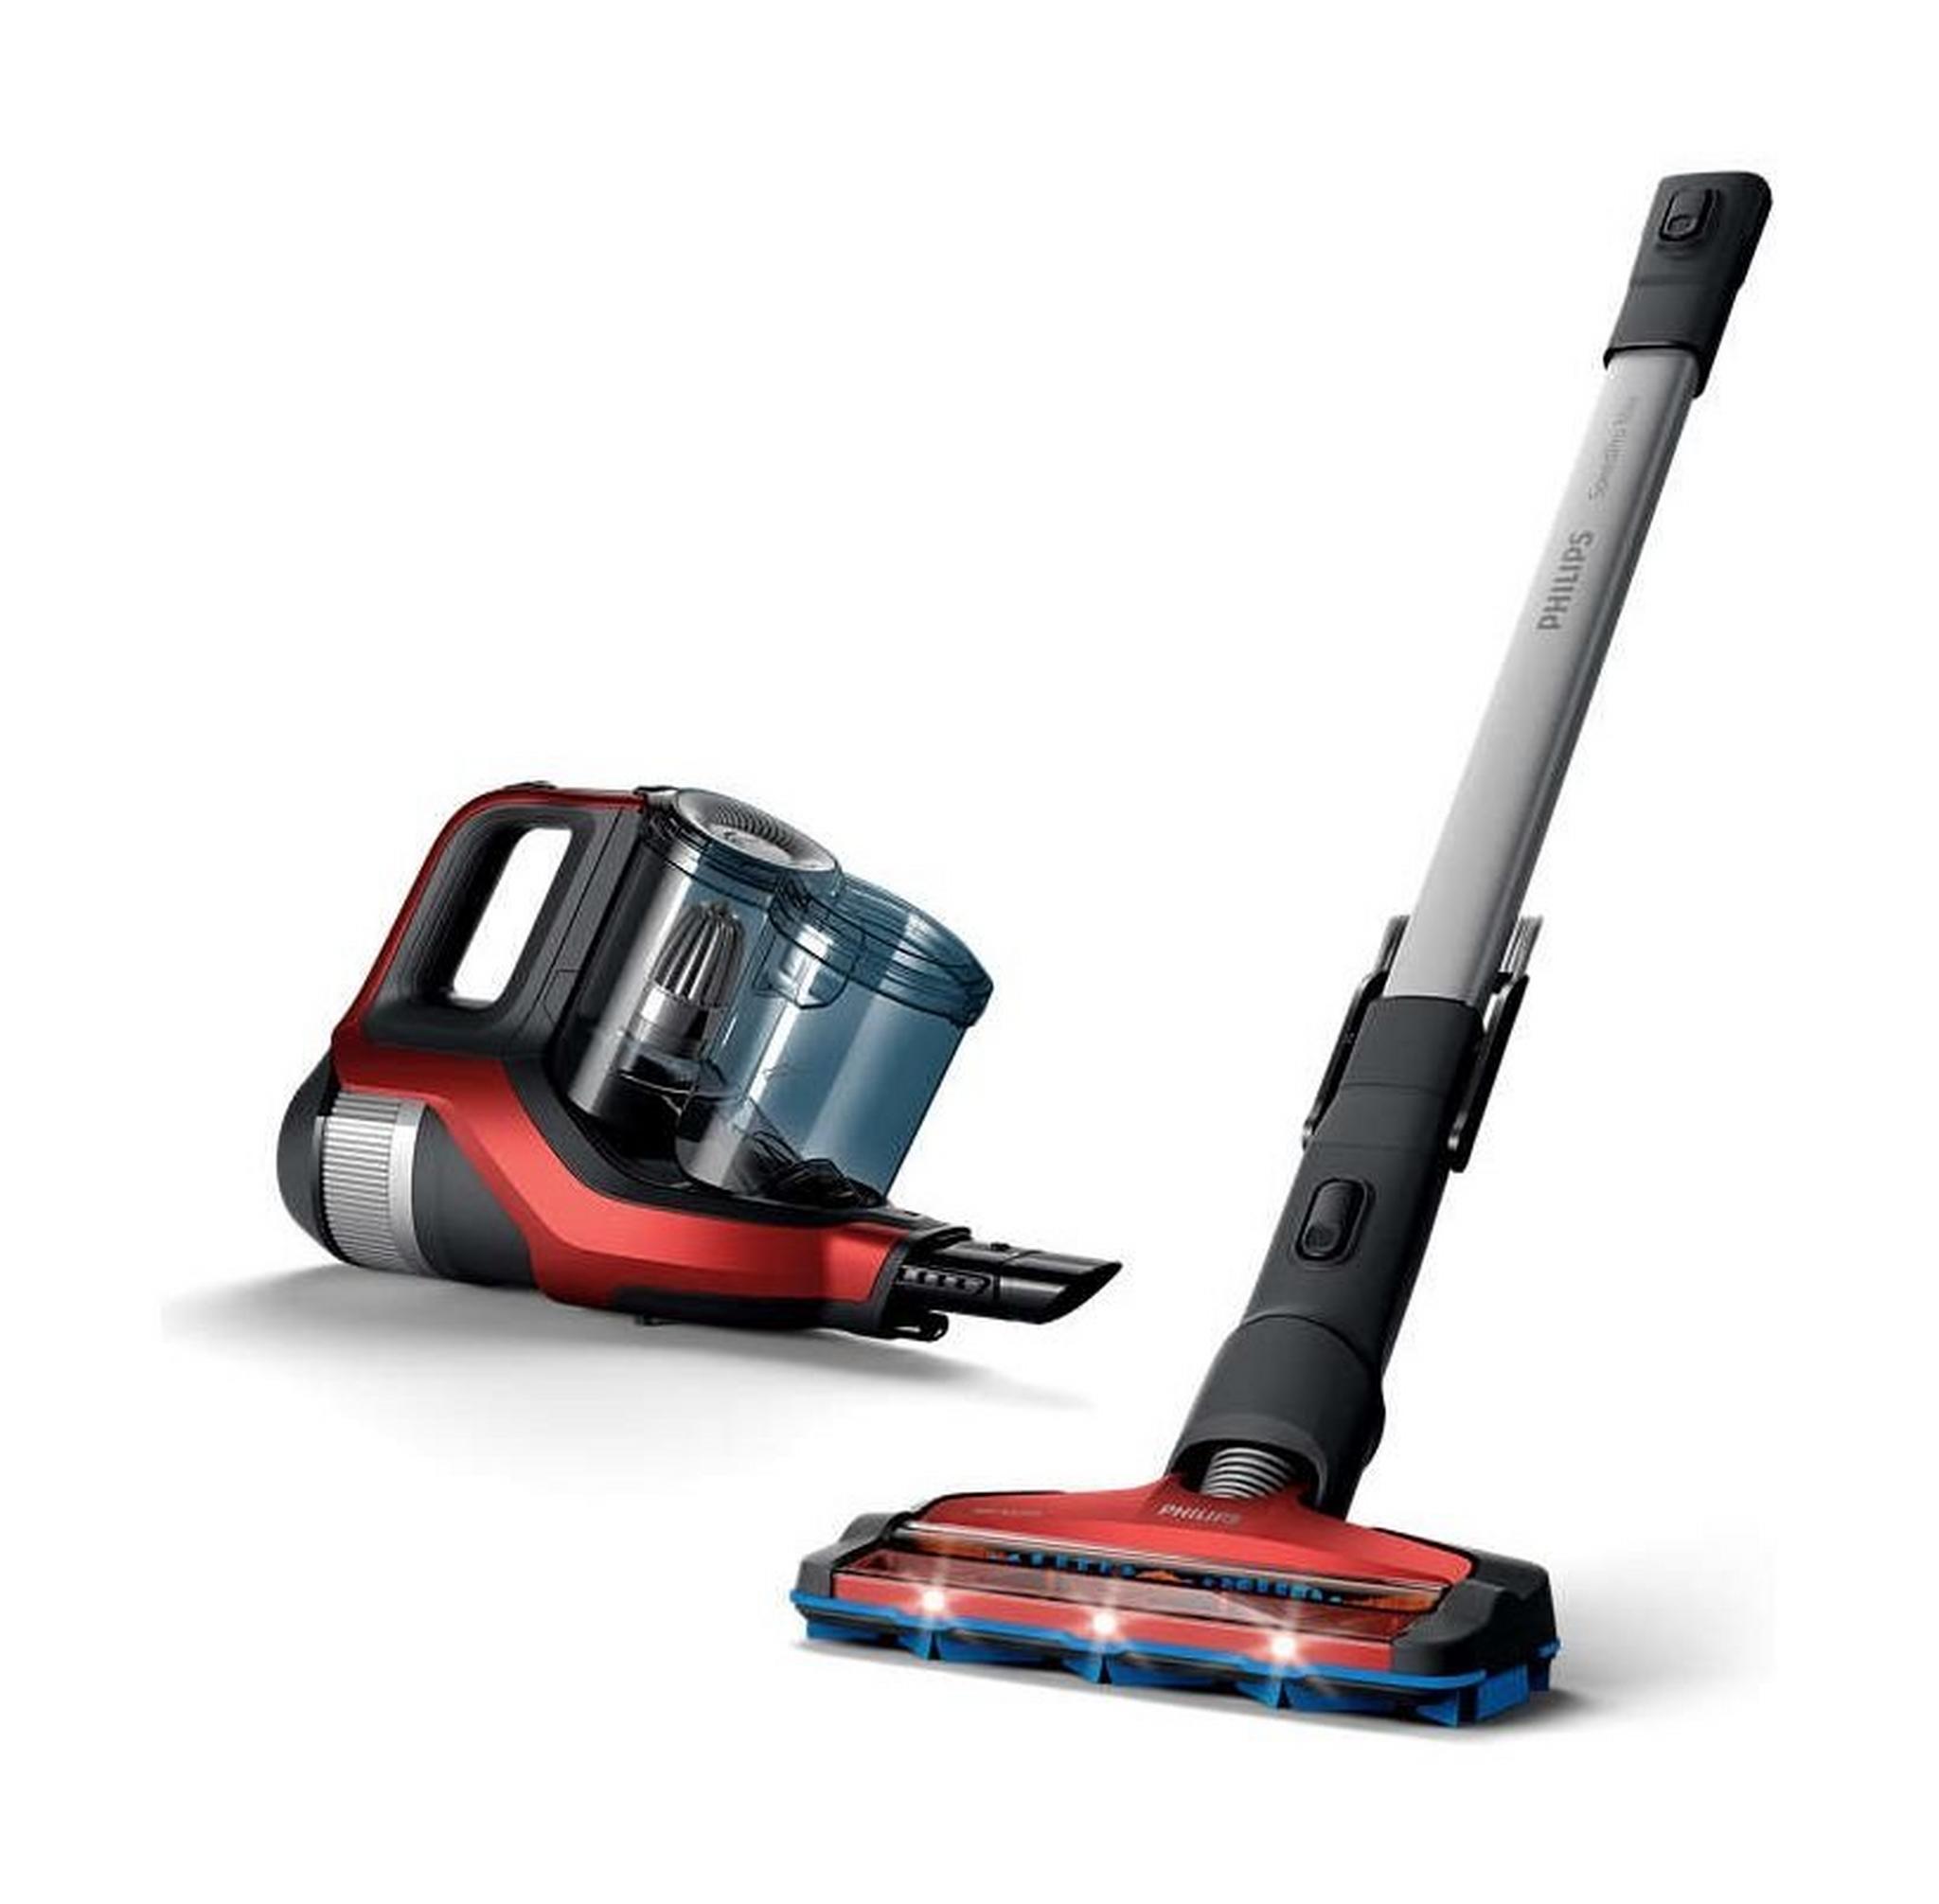 Philips SpeedPro Max Cordless Vacuum Cleaner (FC6823/61) - Red